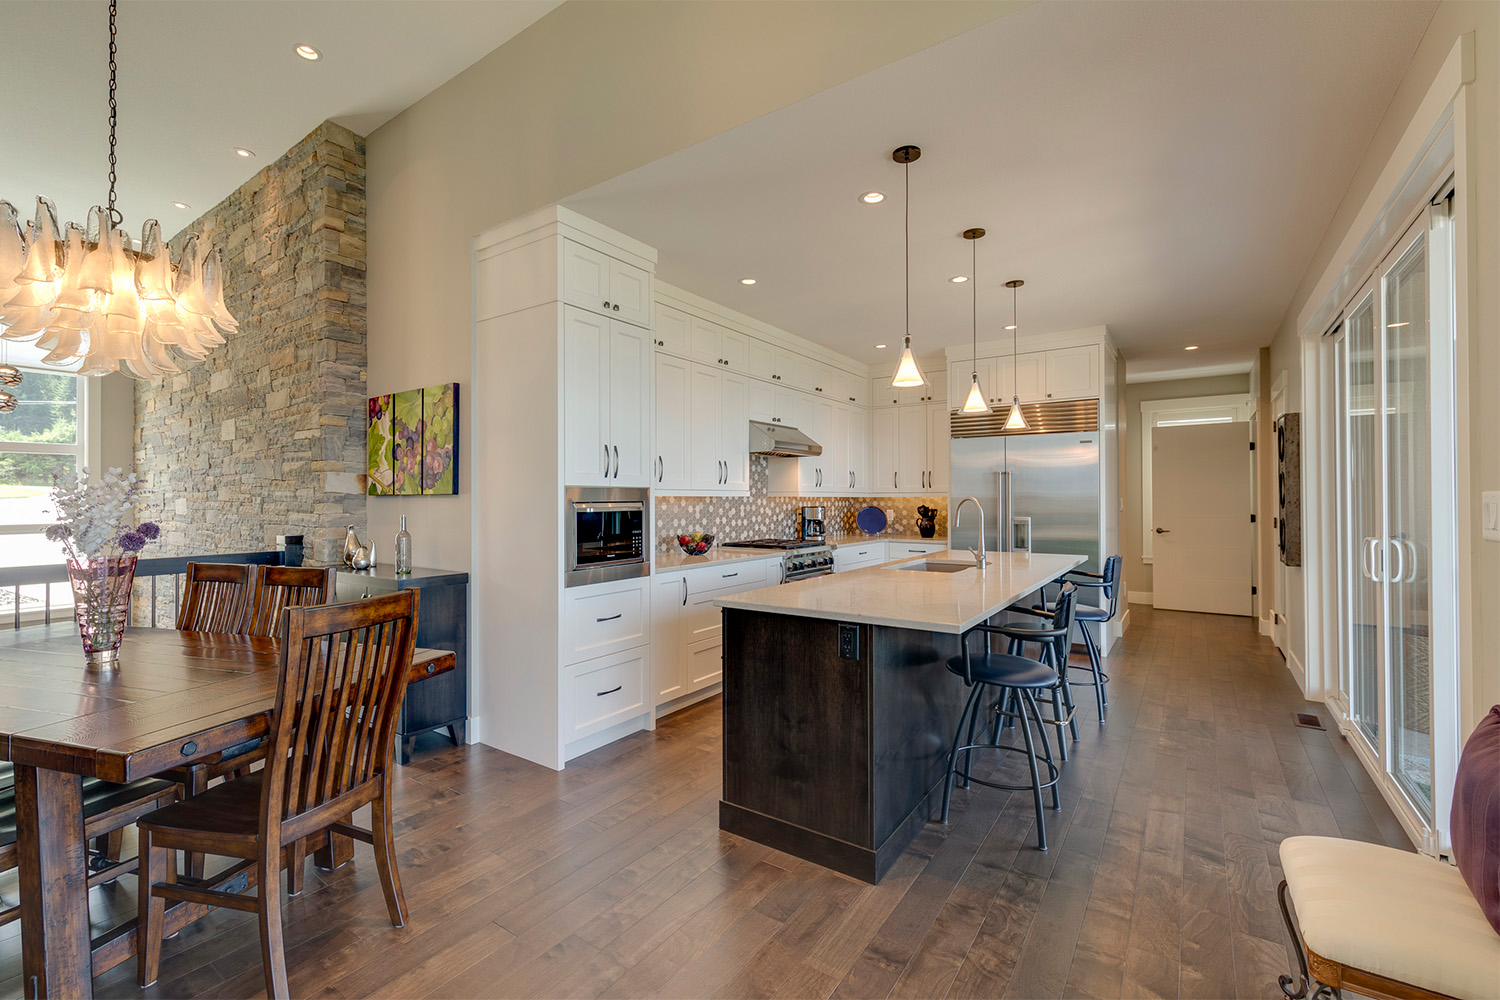 Open concept kitchen and dining space hanging light fixtures, and rock tile wall accents